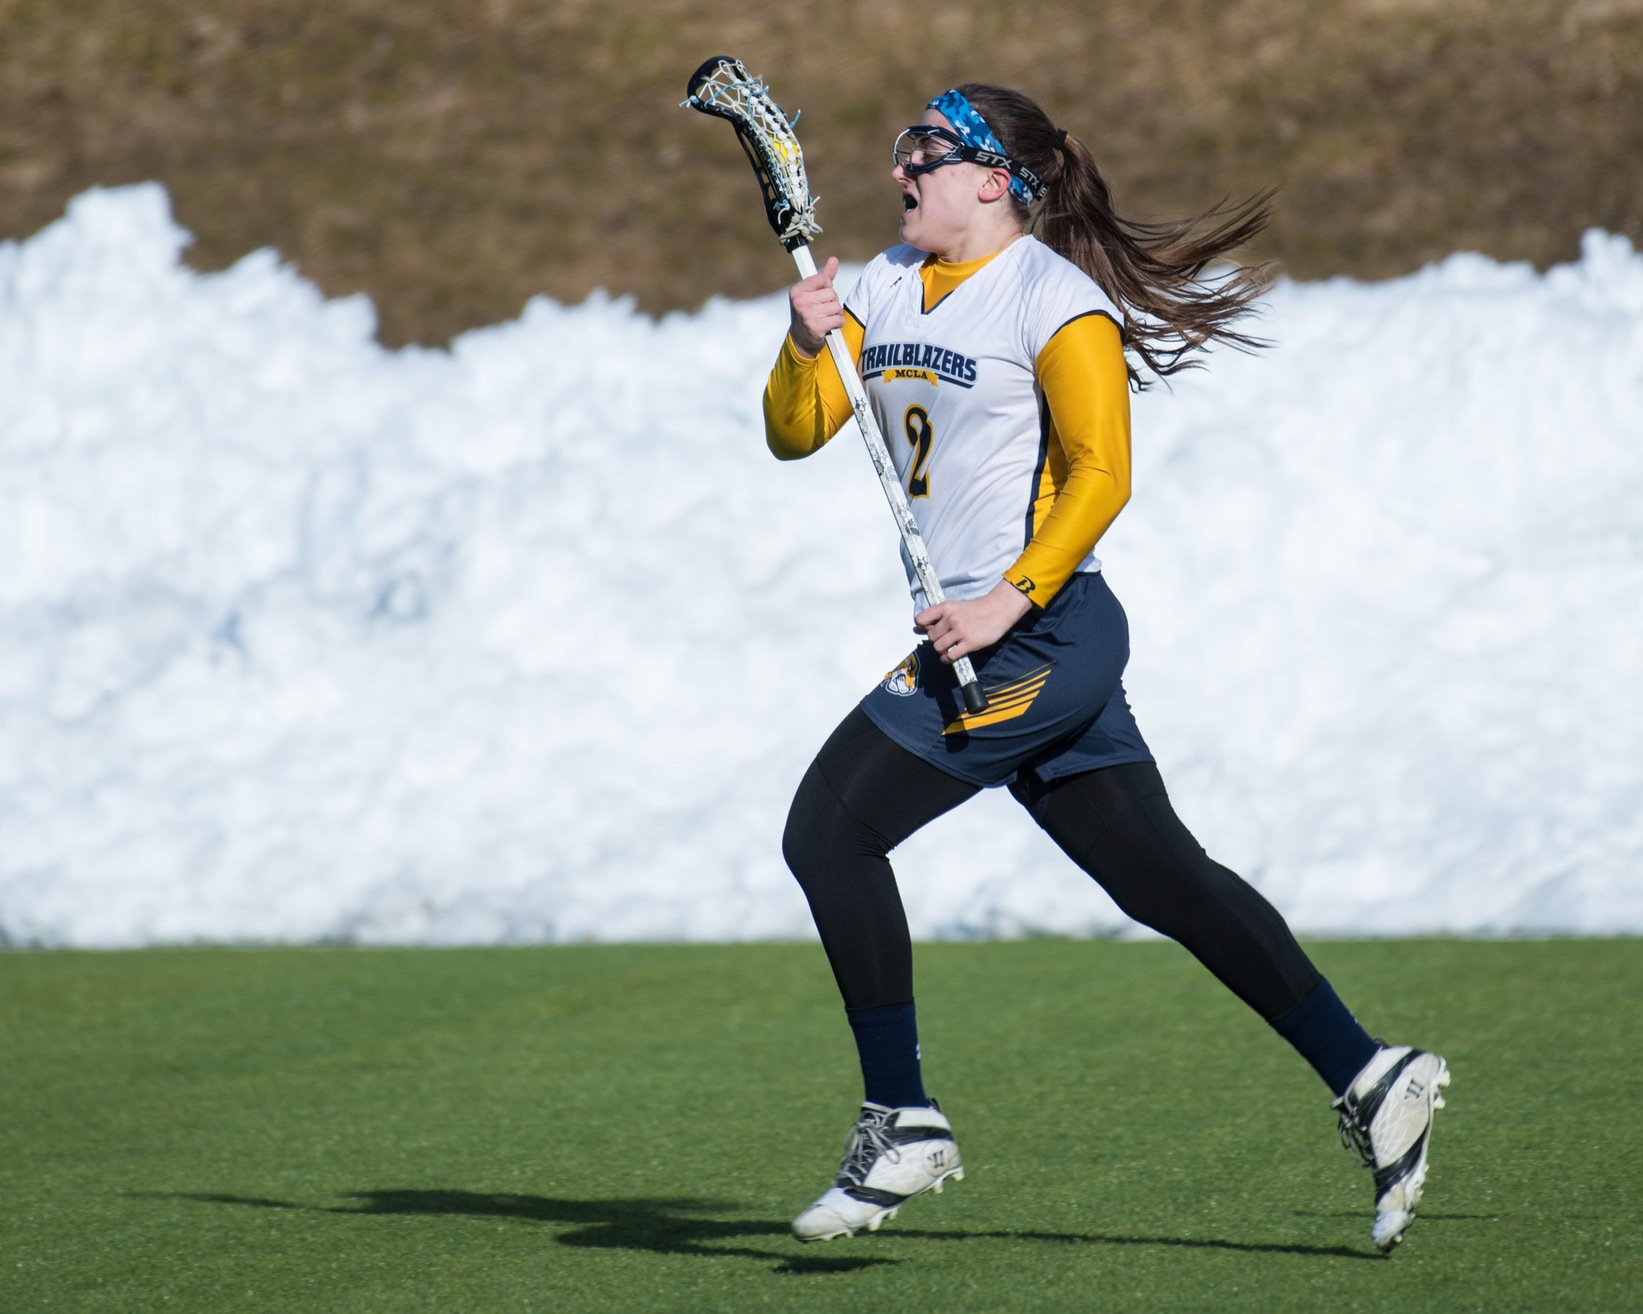 Women's Lacrosse falls to Fitchburg in MASCAC action